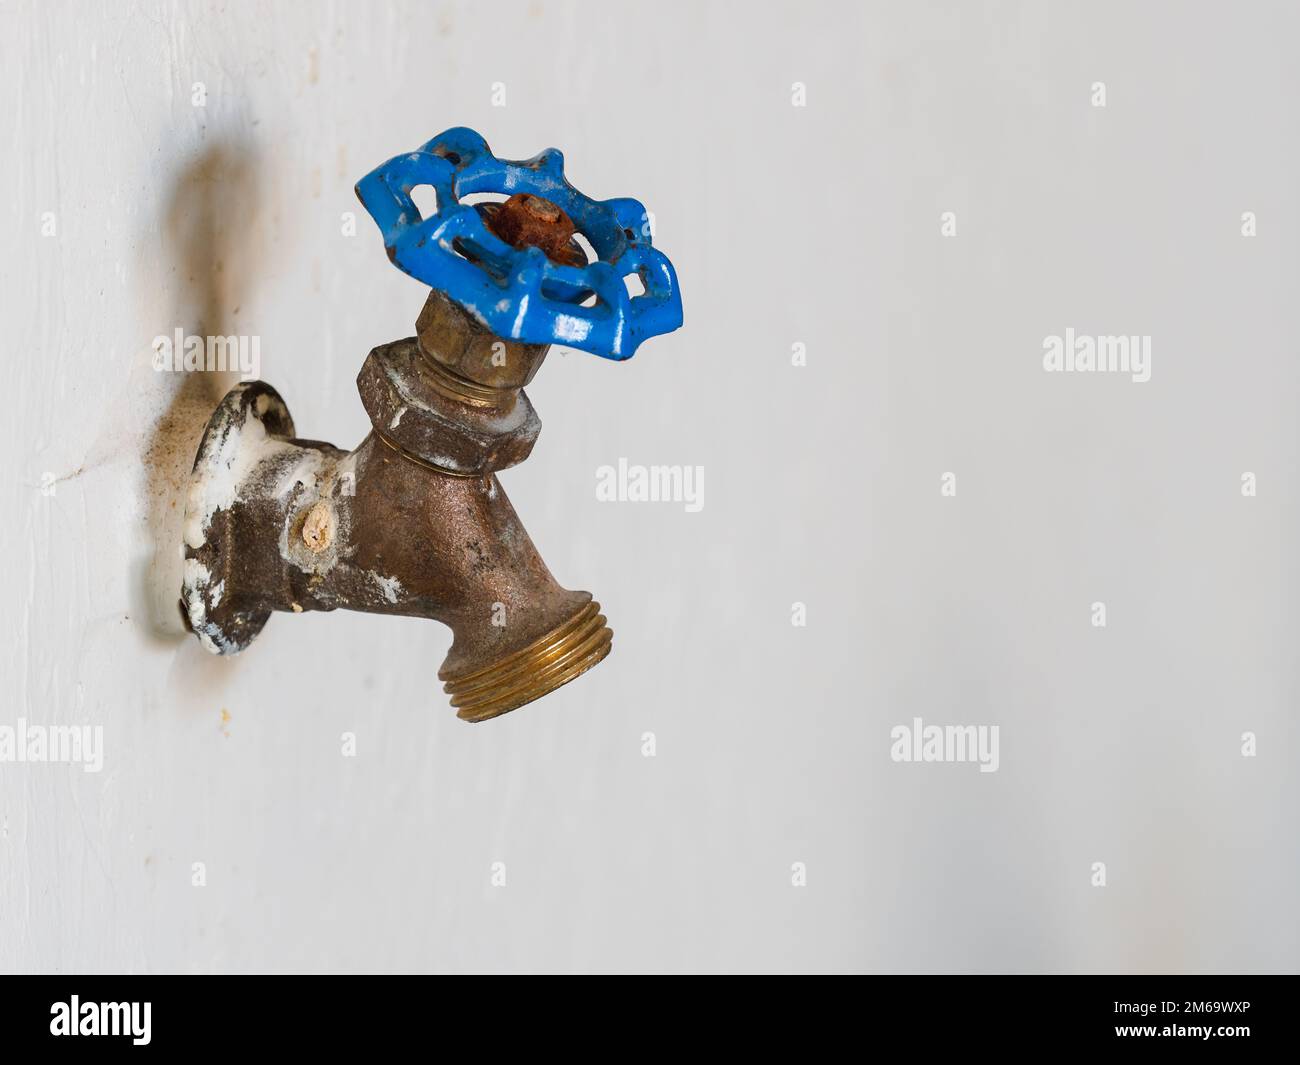 Outdoor water spigot for watering garden and lawn irrigation. Classic brass water faucet with blue handle. Stock Photo